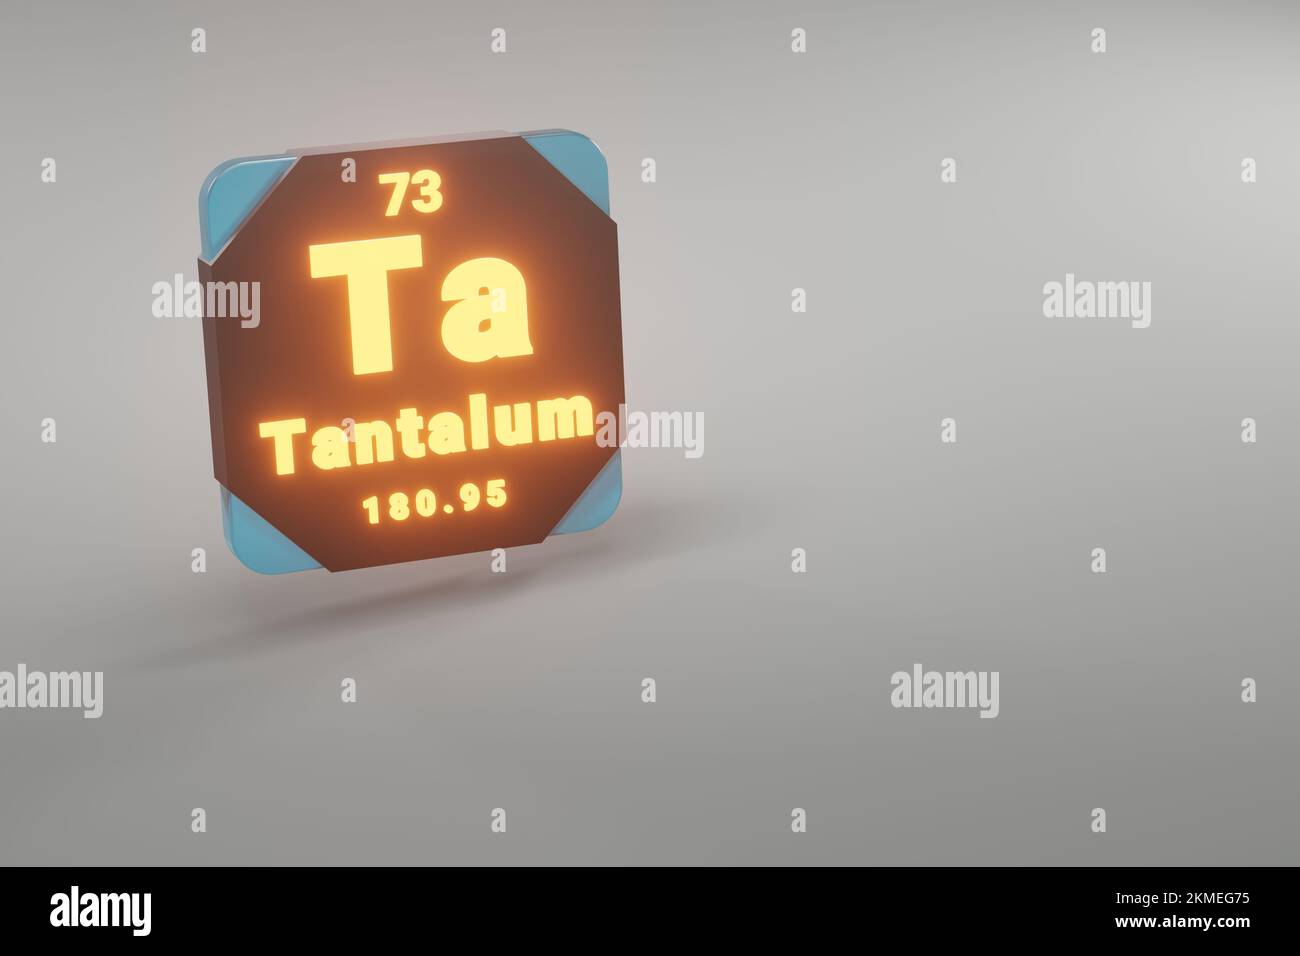 Beautiful abstract illustrations Standing black and fire Tantalum  element of the periodic table. Modern design with golden elements, 3d rendering ill Stock Photo